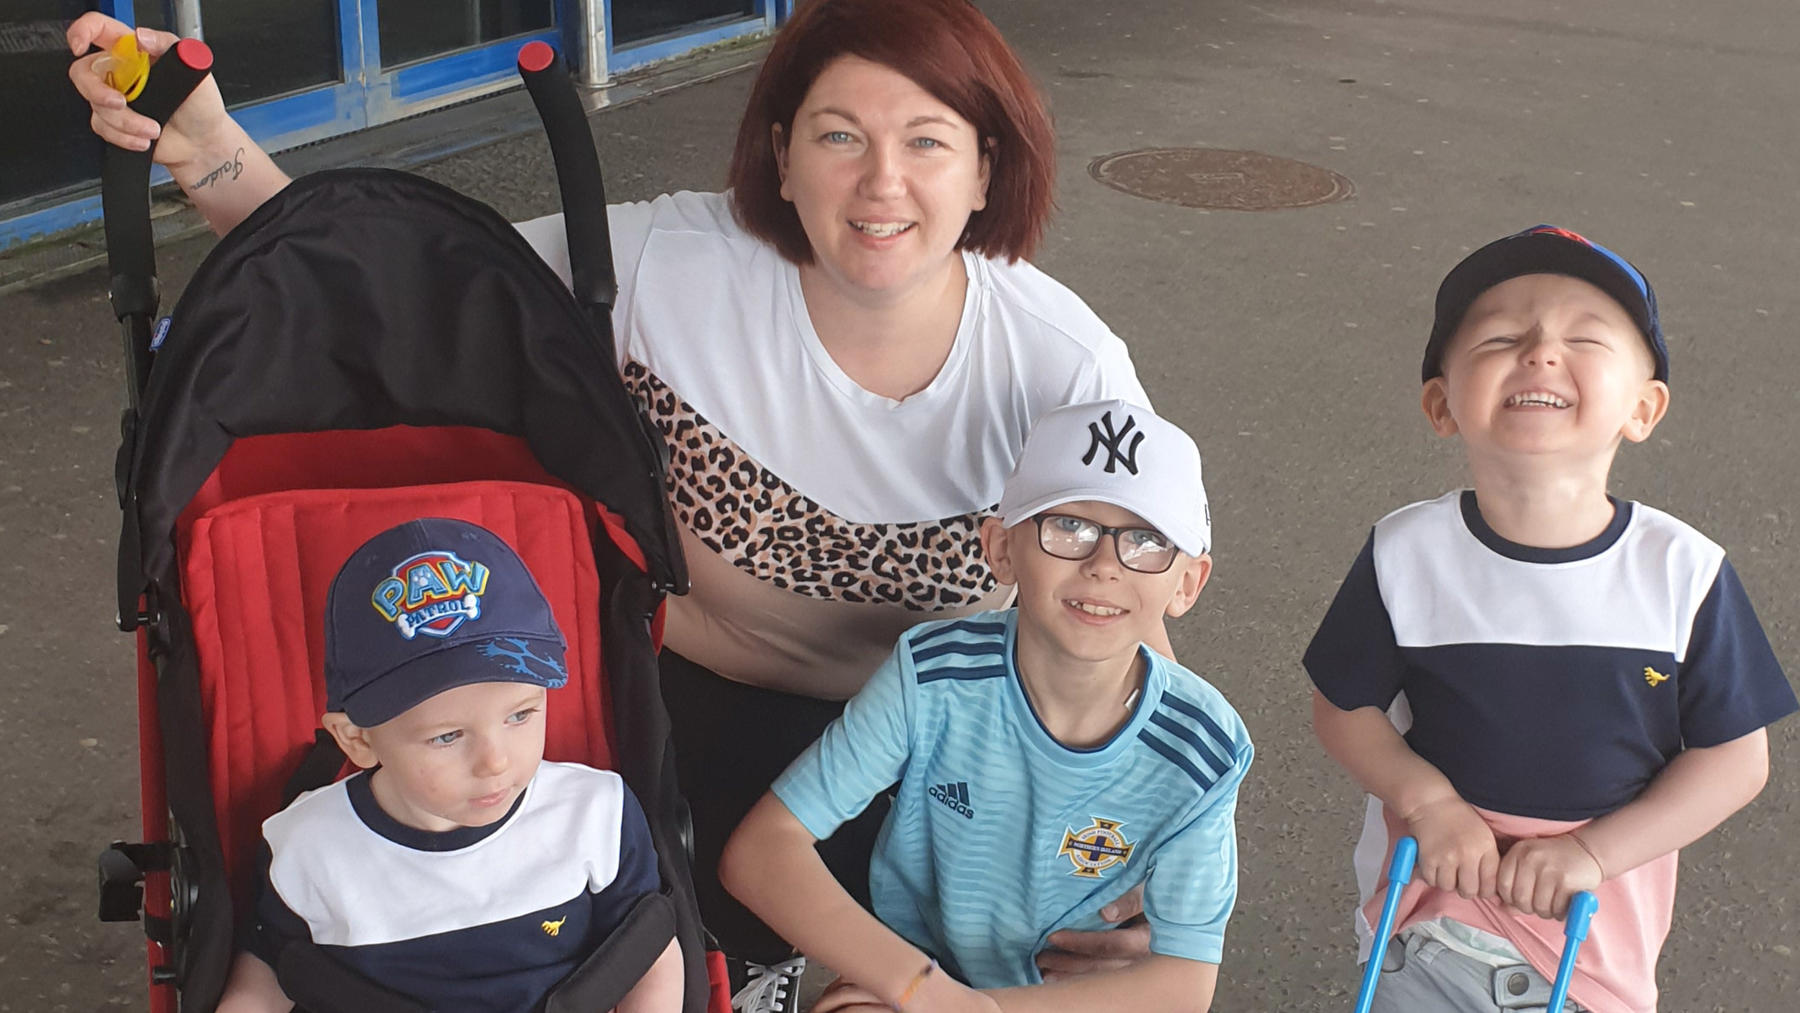 PIC BY CATERS NEWS (PICTURED Danielle Martin, 32, with her three sons Jaiden 9, Parker, 3, and Joshua, 2) A mother-of-three discovered she was pregnant with twins after waking up from an induced coma whilst battling COVID-19. Danielle Martin, 32, ini